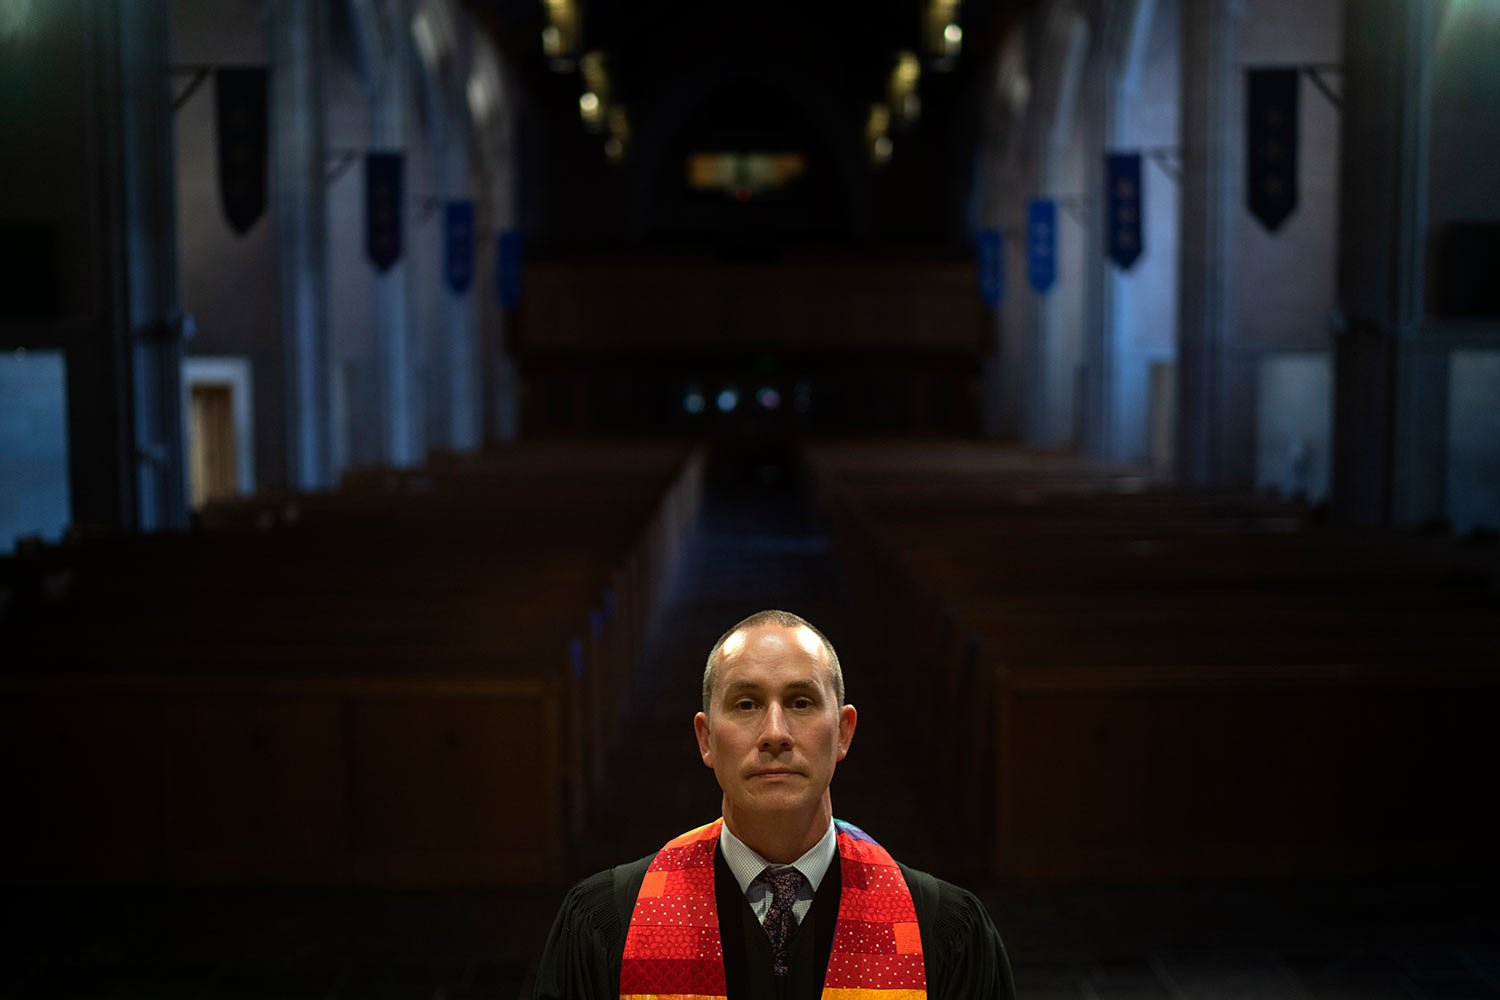  Rev. Stephen Cady stands for a portrait in the sanctuary of Asbury First United Methodist Church, Monday, Aug. 21, 2023, in Rochester, N.Y. (AP Photo/David Goldman)  